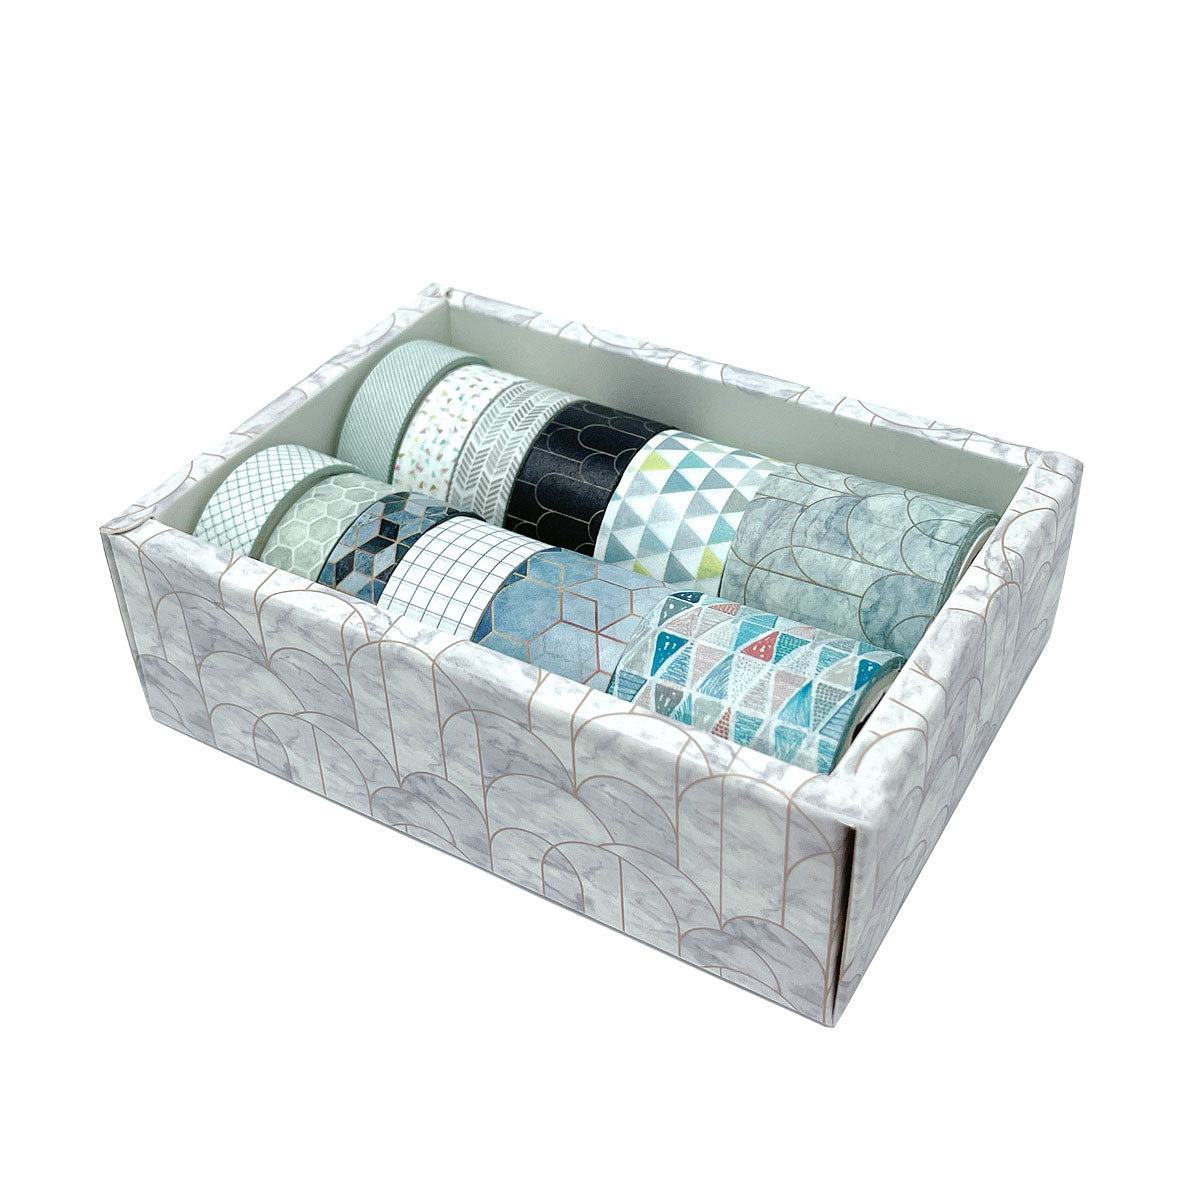 Wrapables Decorative Washi Tape Box Set for DIY Arts & Crafts, Scrapbooking, Diary, Stationery, Card-Making, Gift Wrapping (12 Rolls)